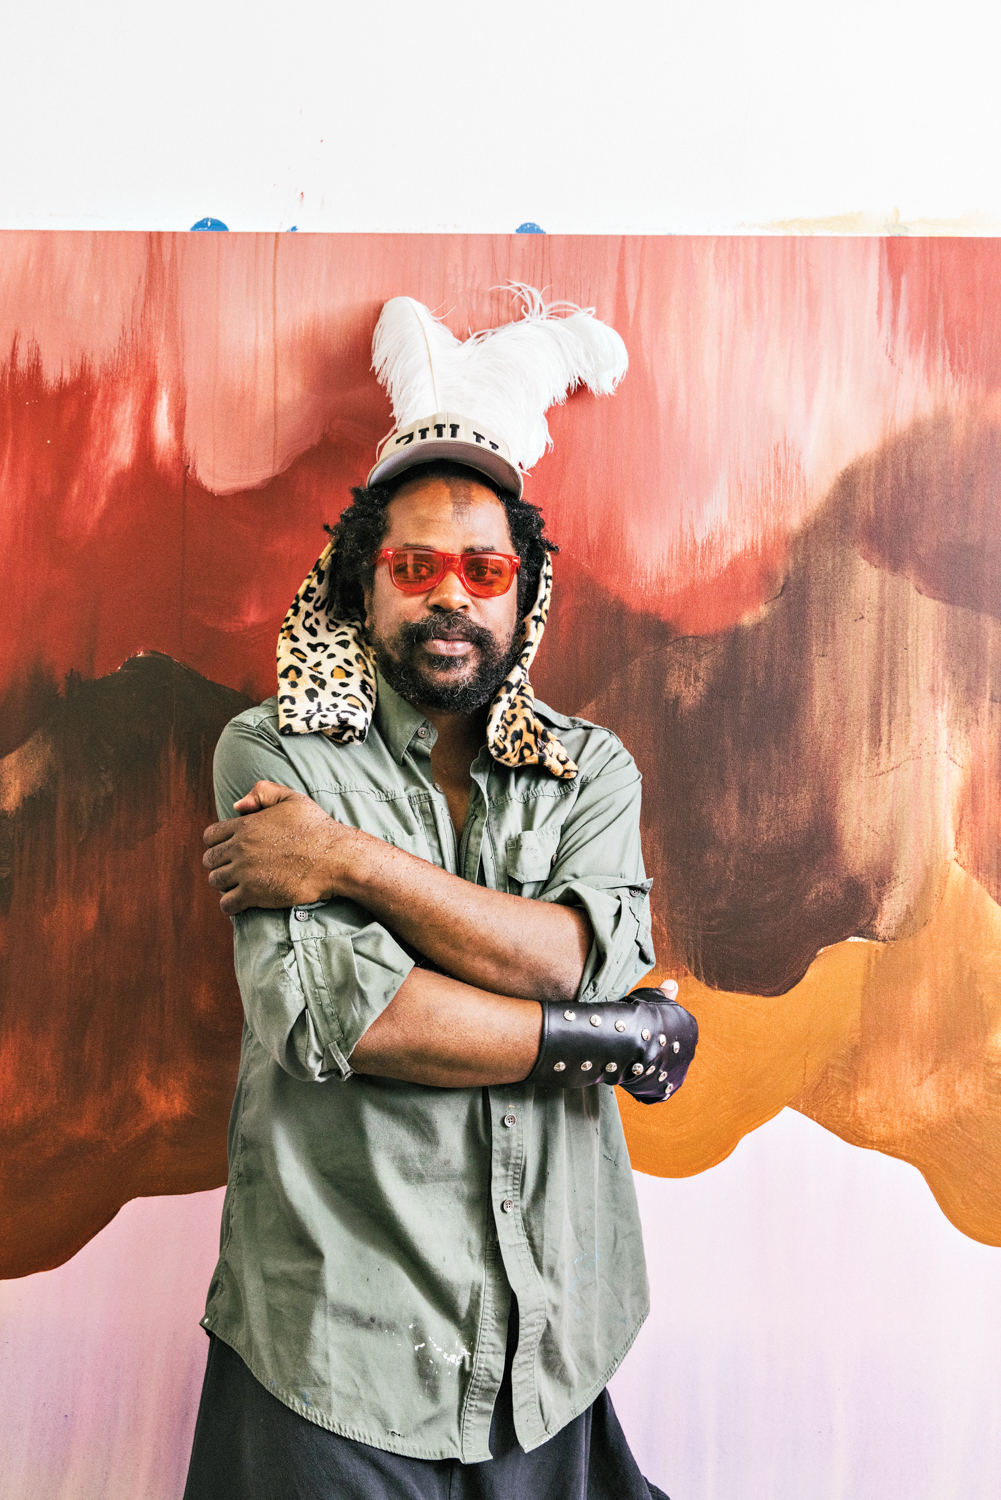 artist umar Rashid poses against a painted wall wearing red sunglasses and a hat with white feathers